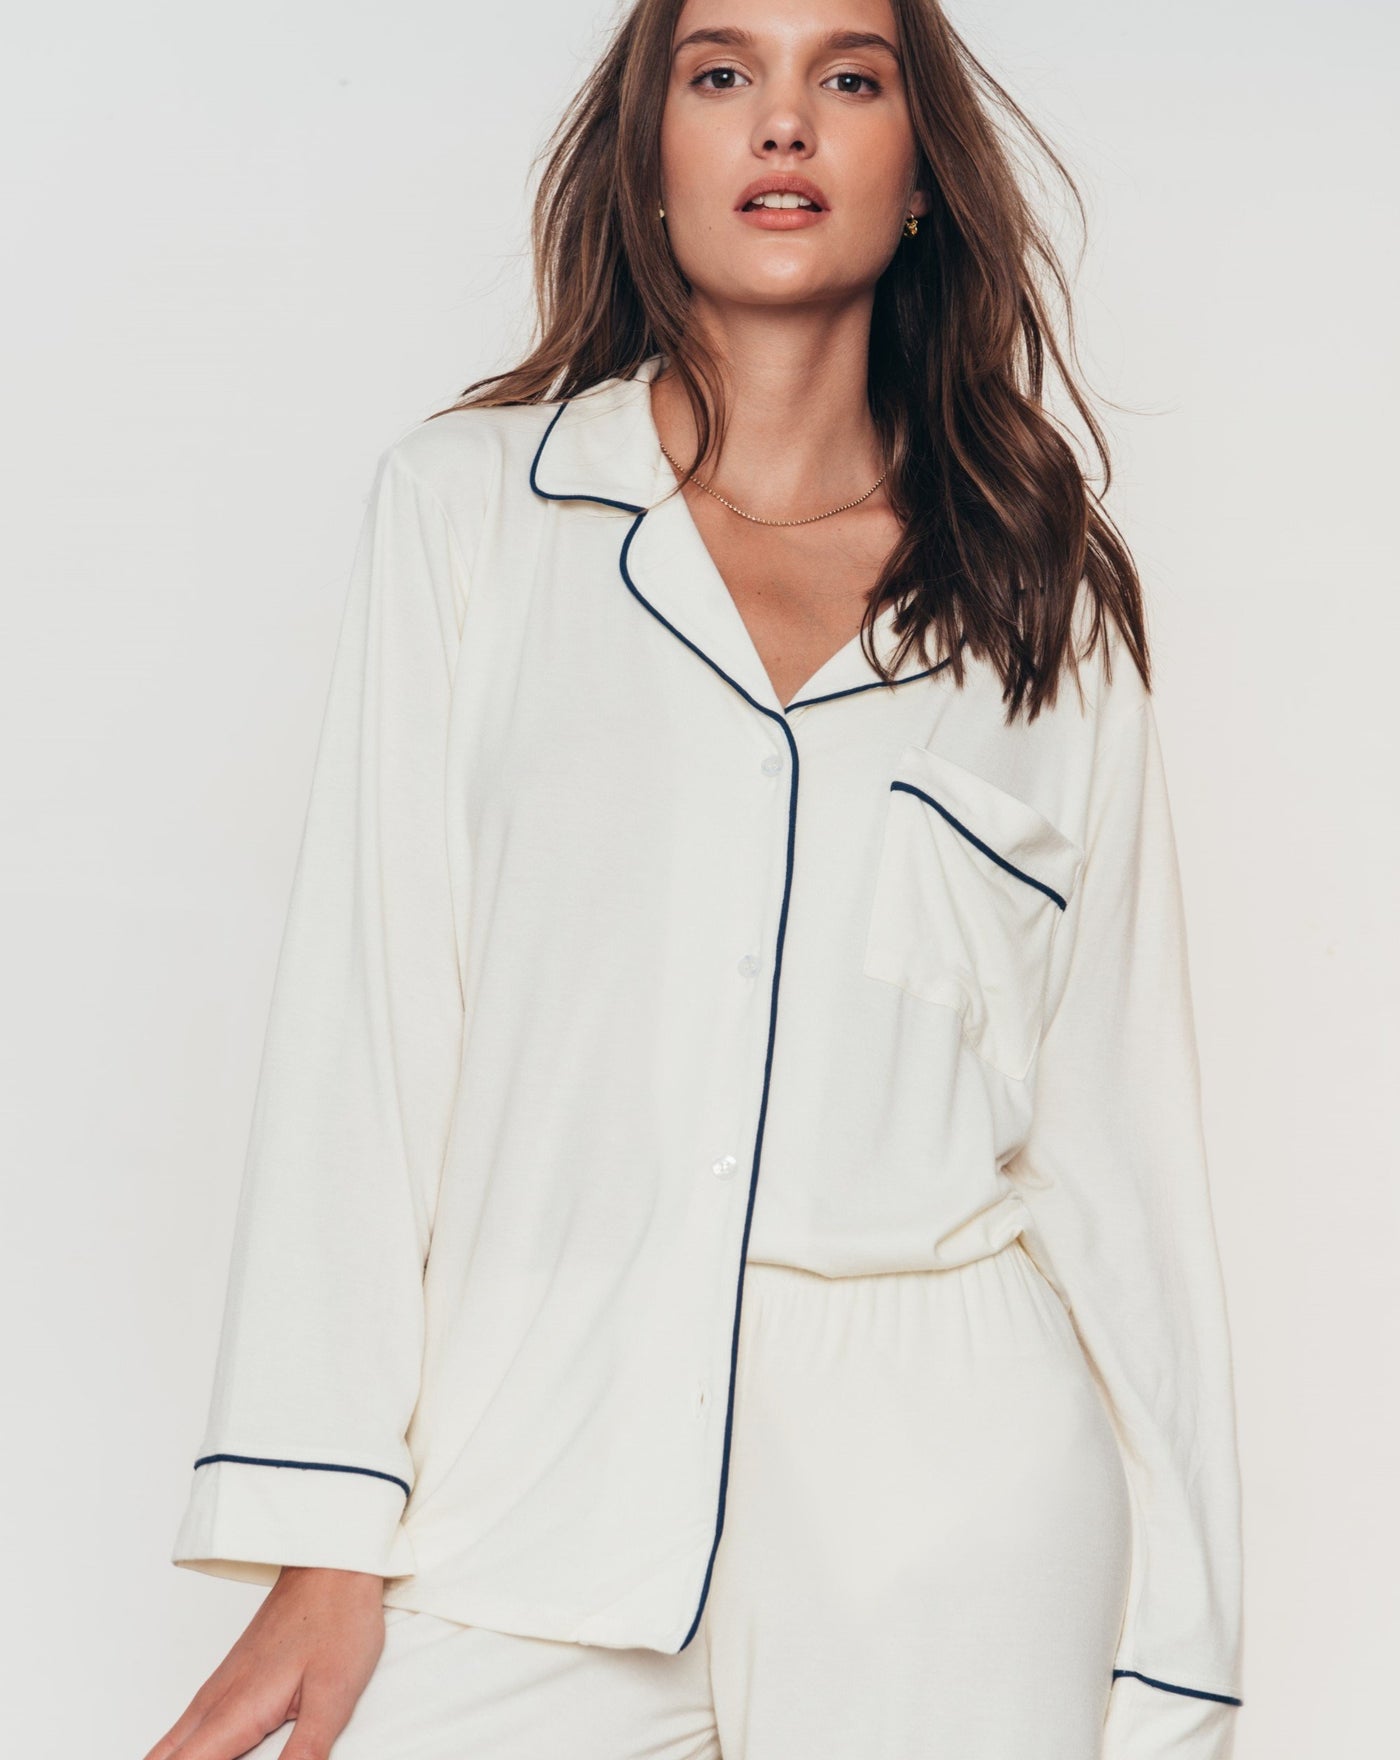 Classic long sleeve luxury pajama set with button front, collar and contrast piping in soft and comfortable ivory modal jersey.